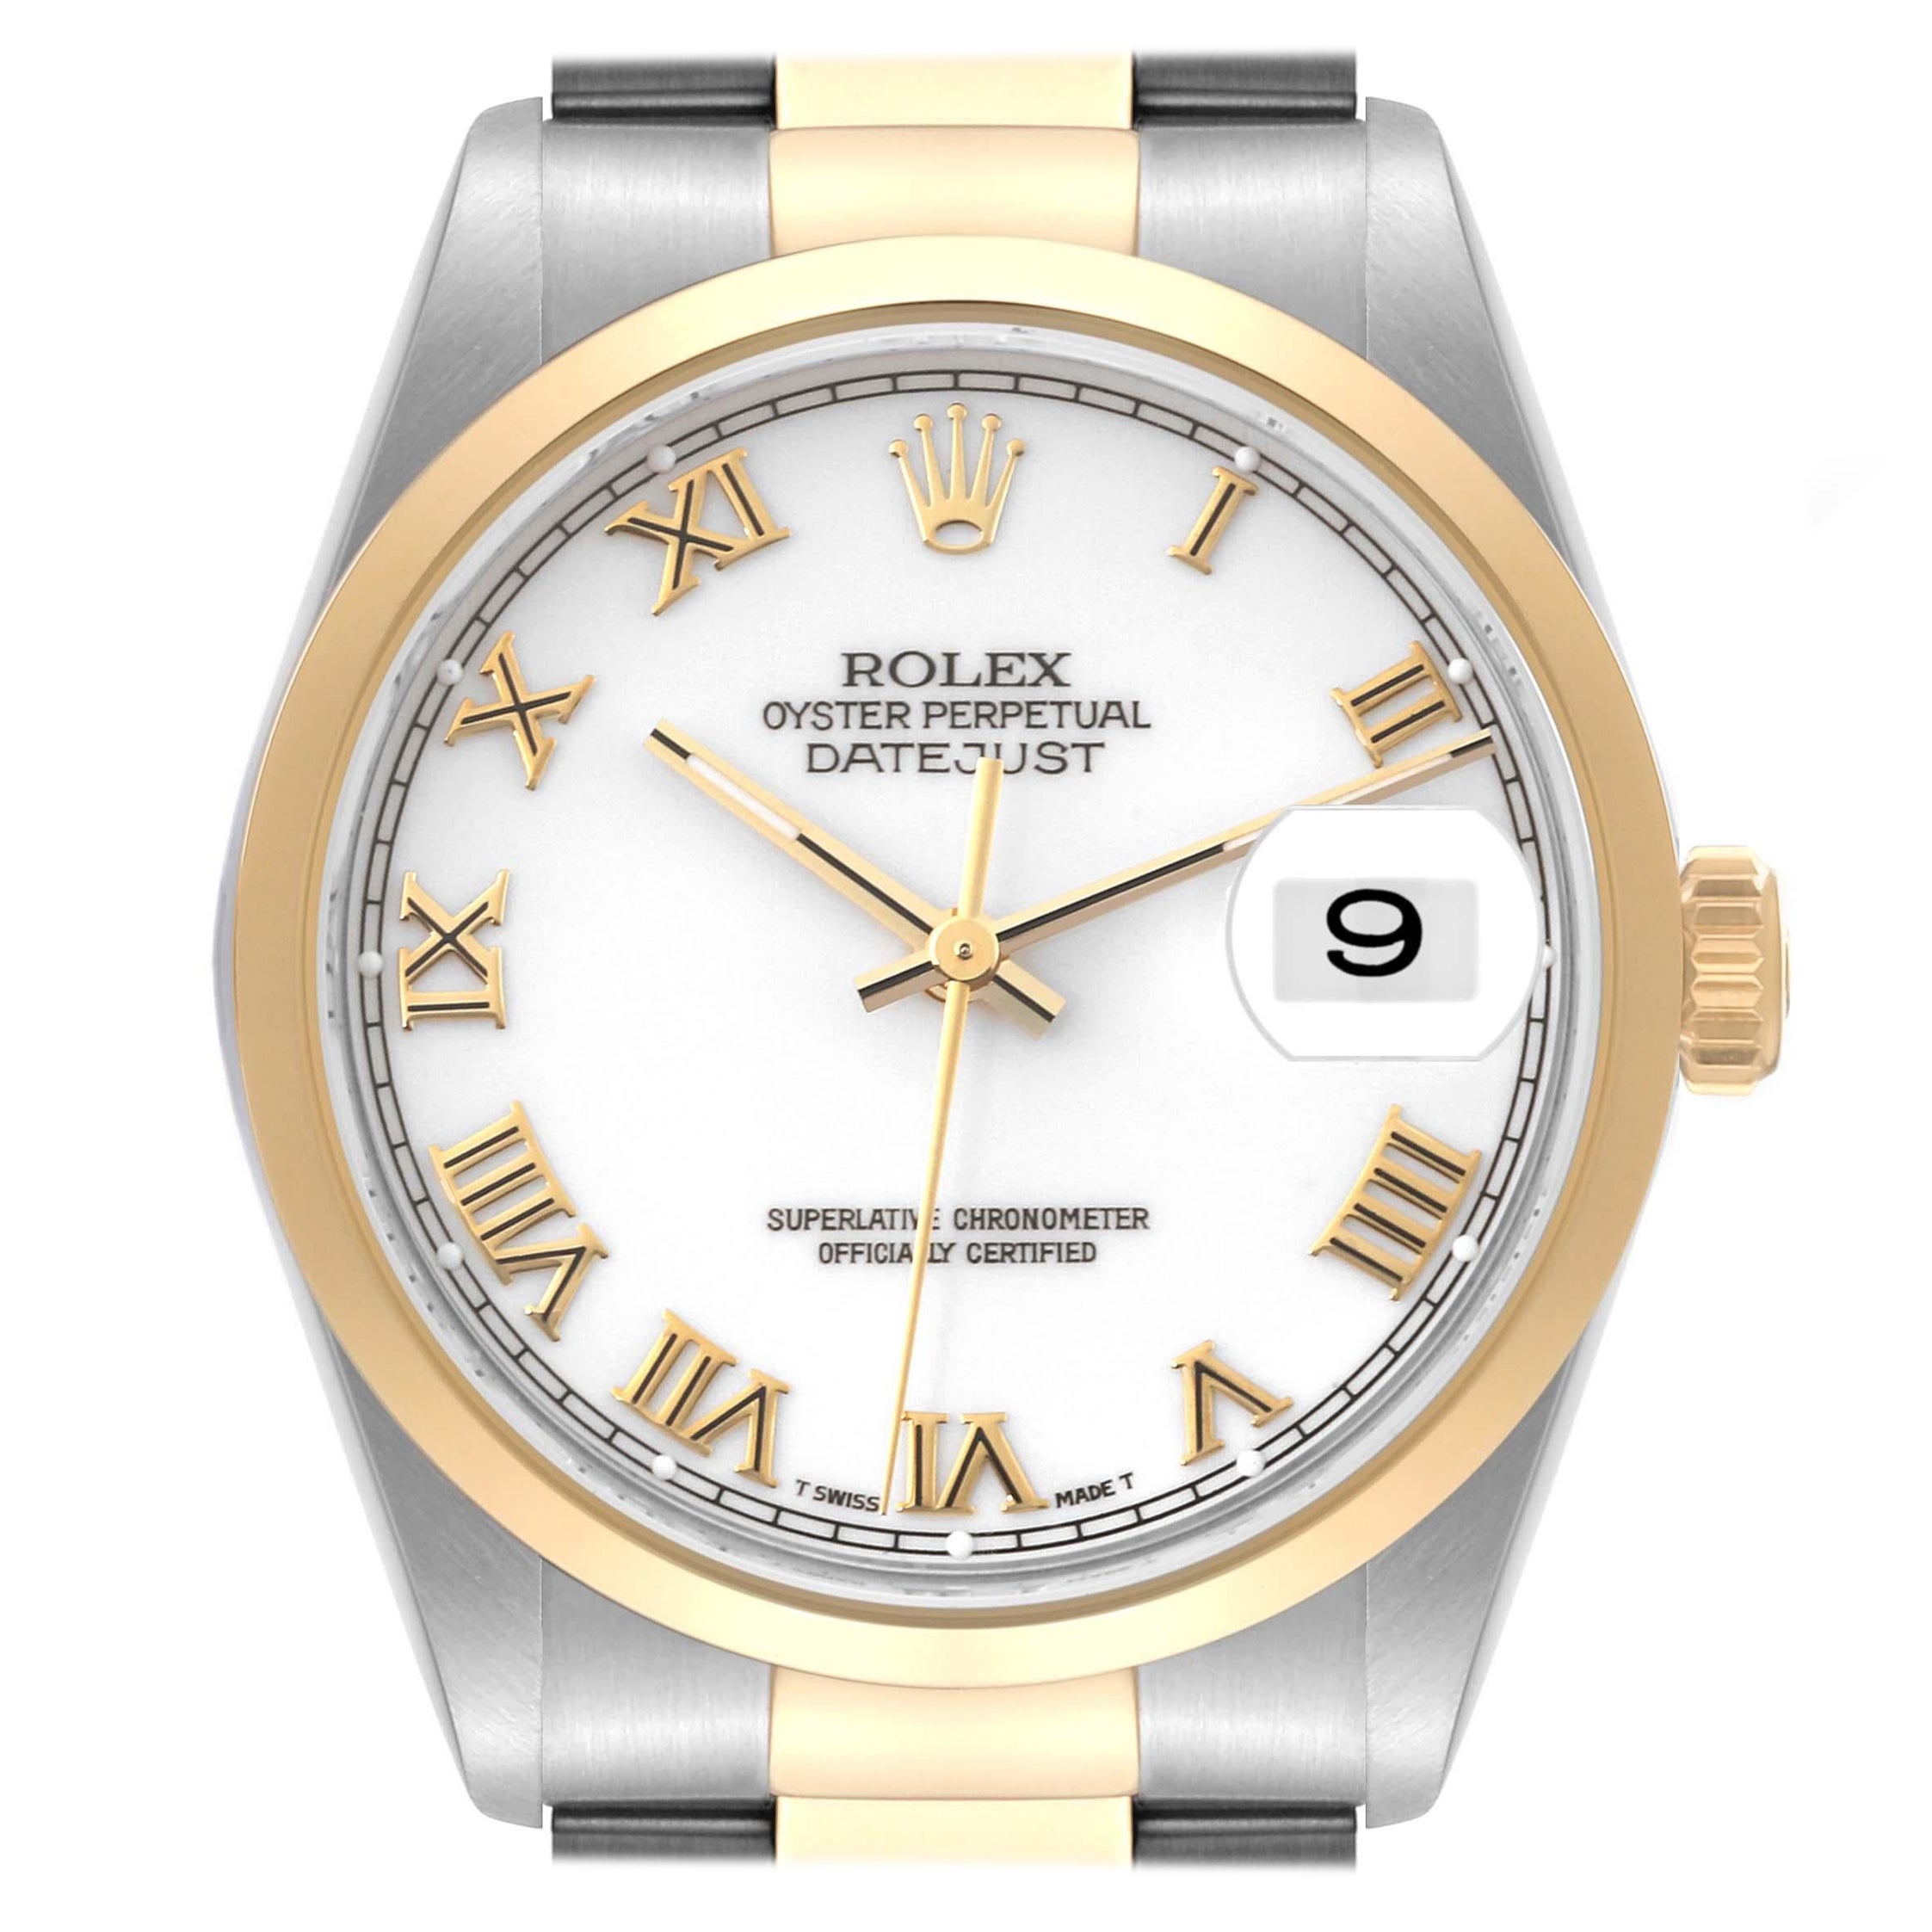 Rolex Datejust Steel Yellow Gold White Dial Mens Watch 16203 Box Papers